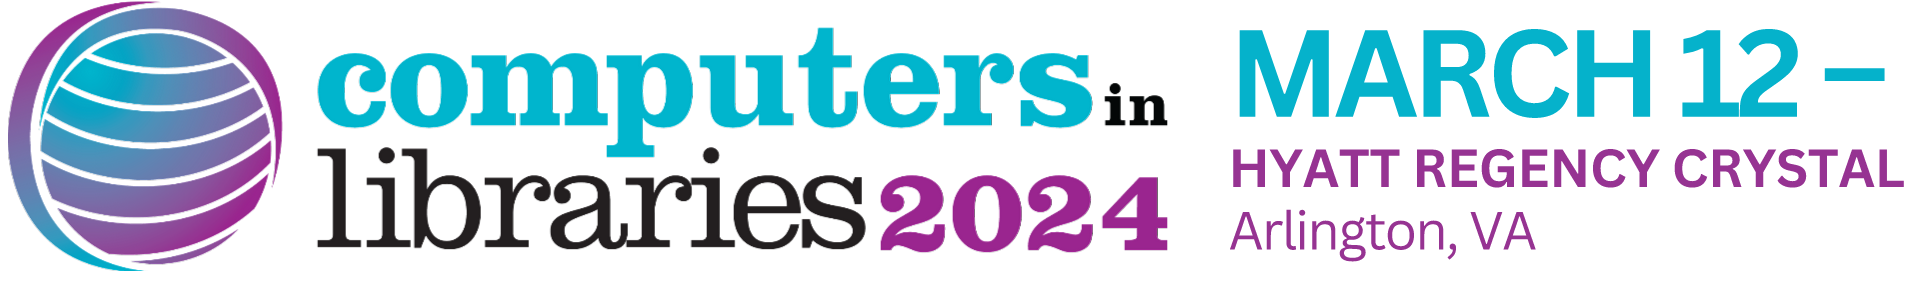 Computers in Libraries 2024 logo